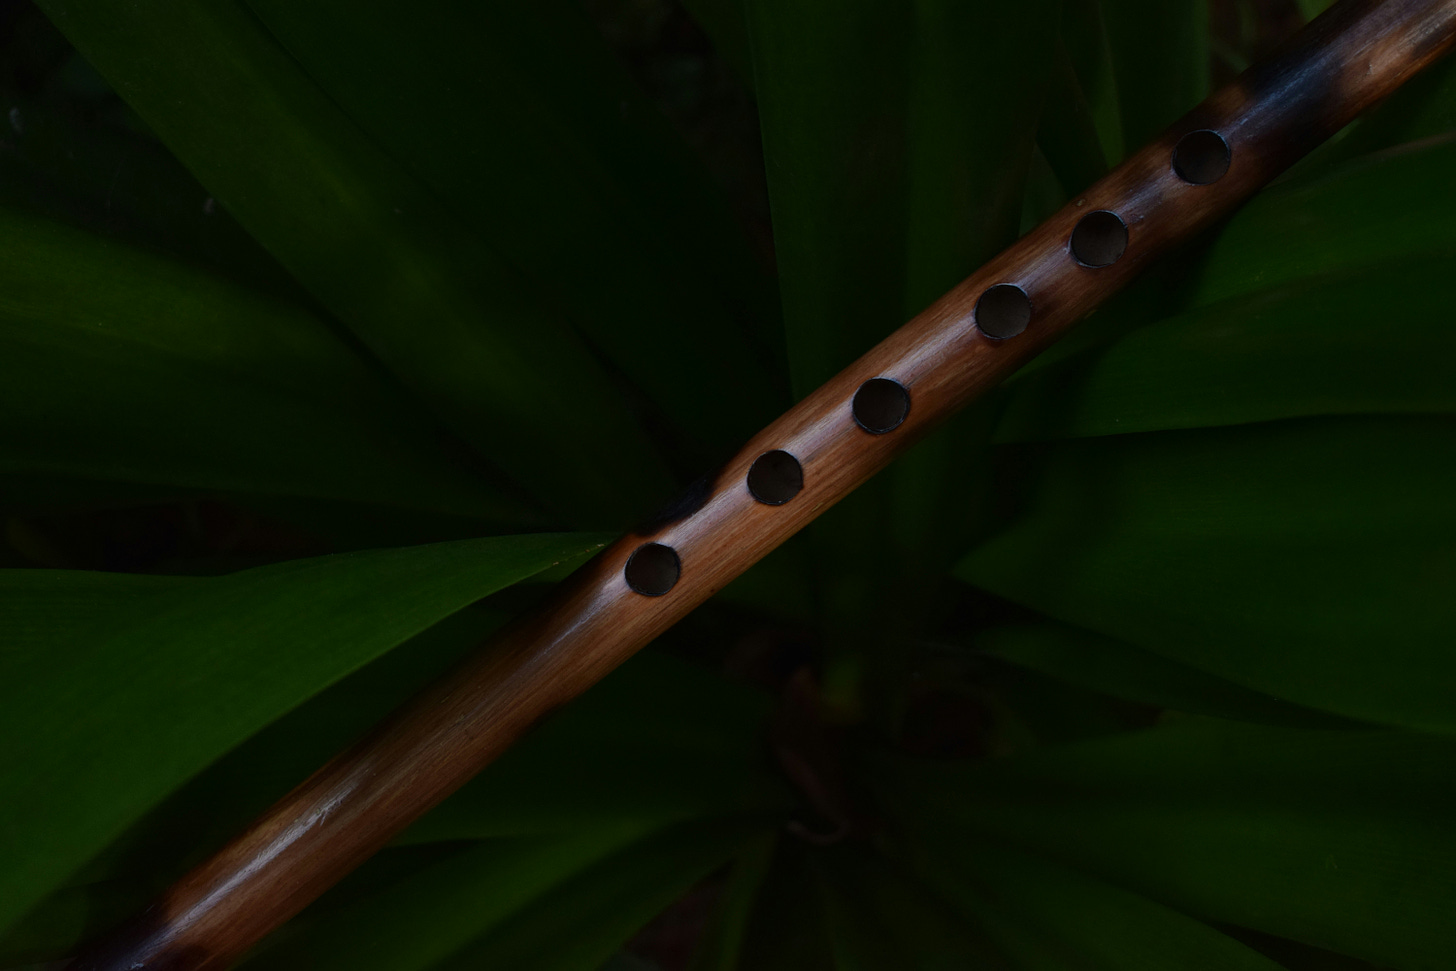 A wooden flute on a green leaf